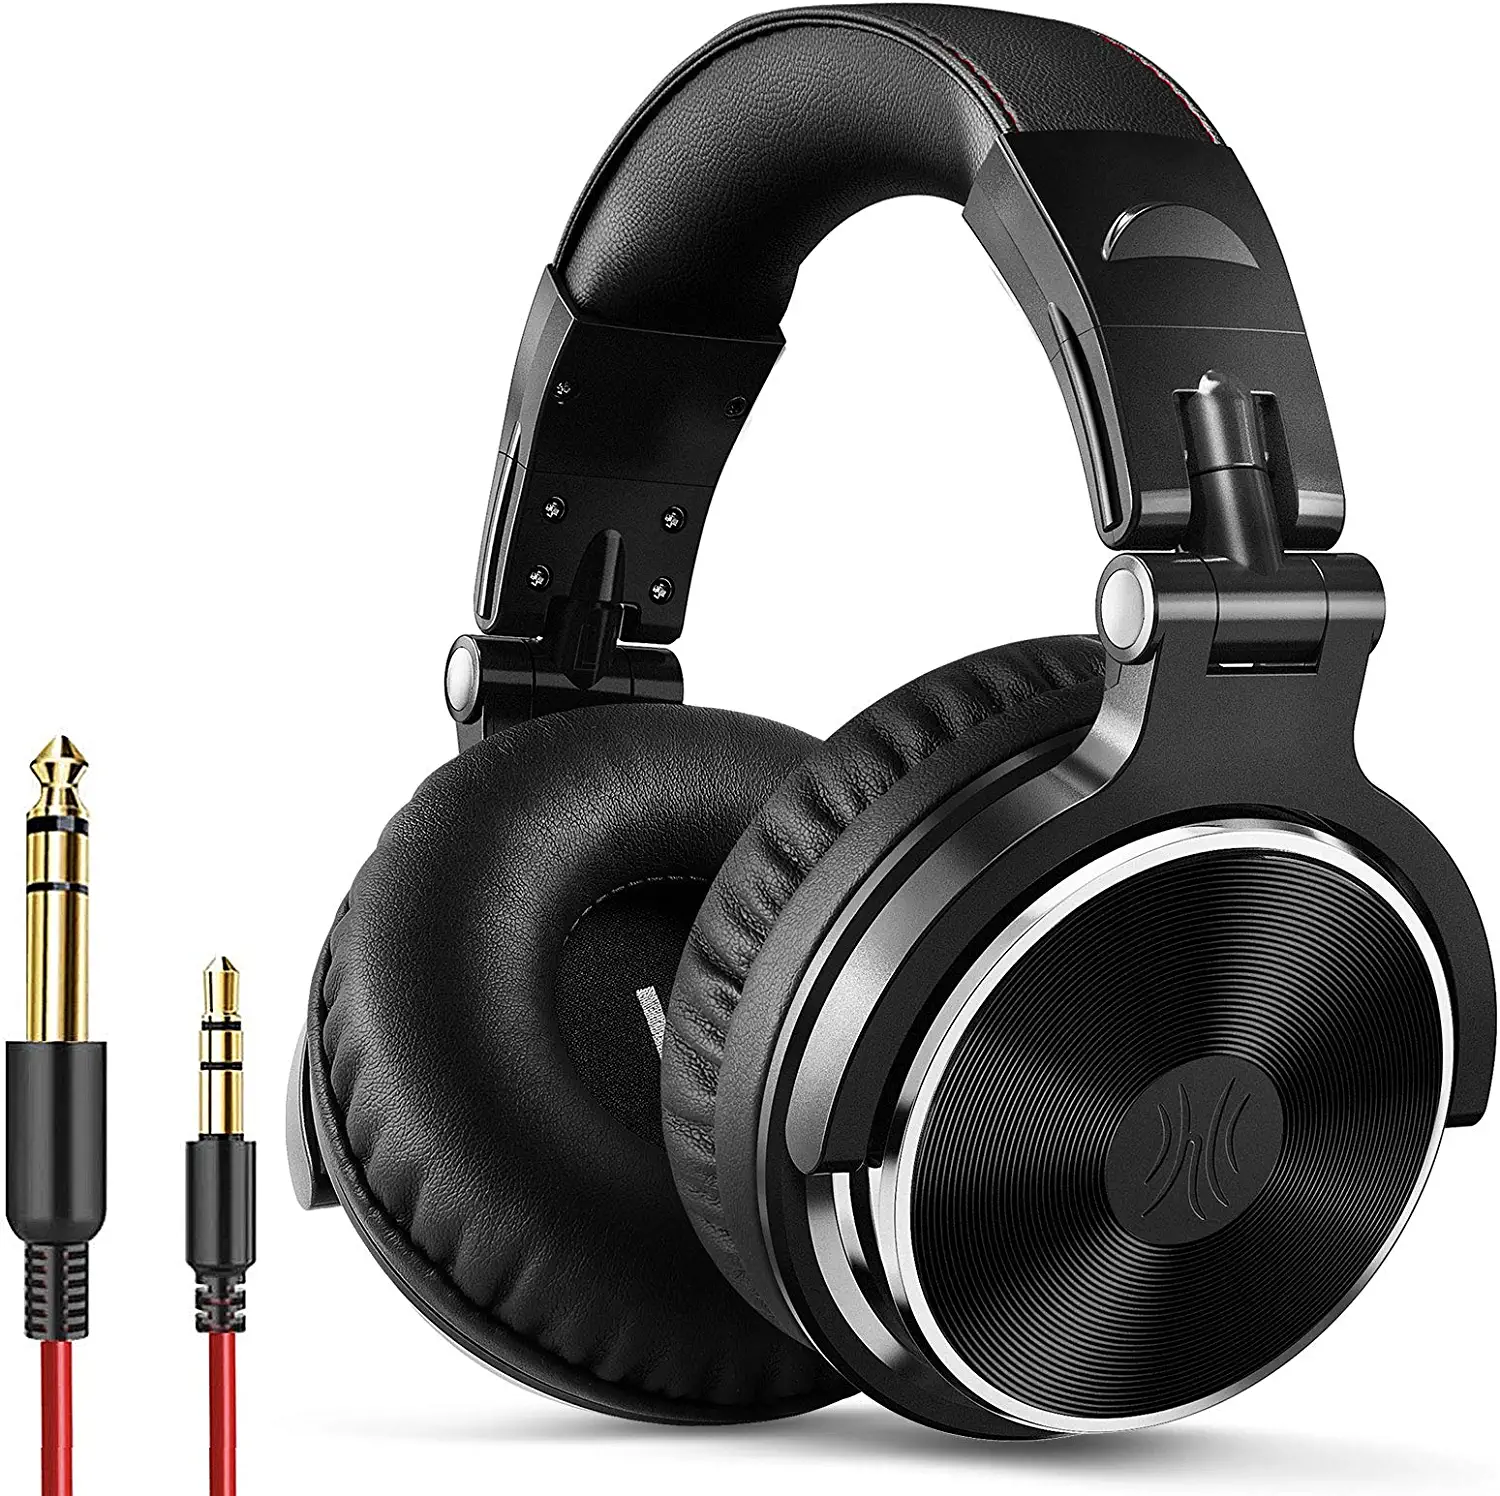 7 Best Gaming Headphones Without Mic In 2022 - OracleJet